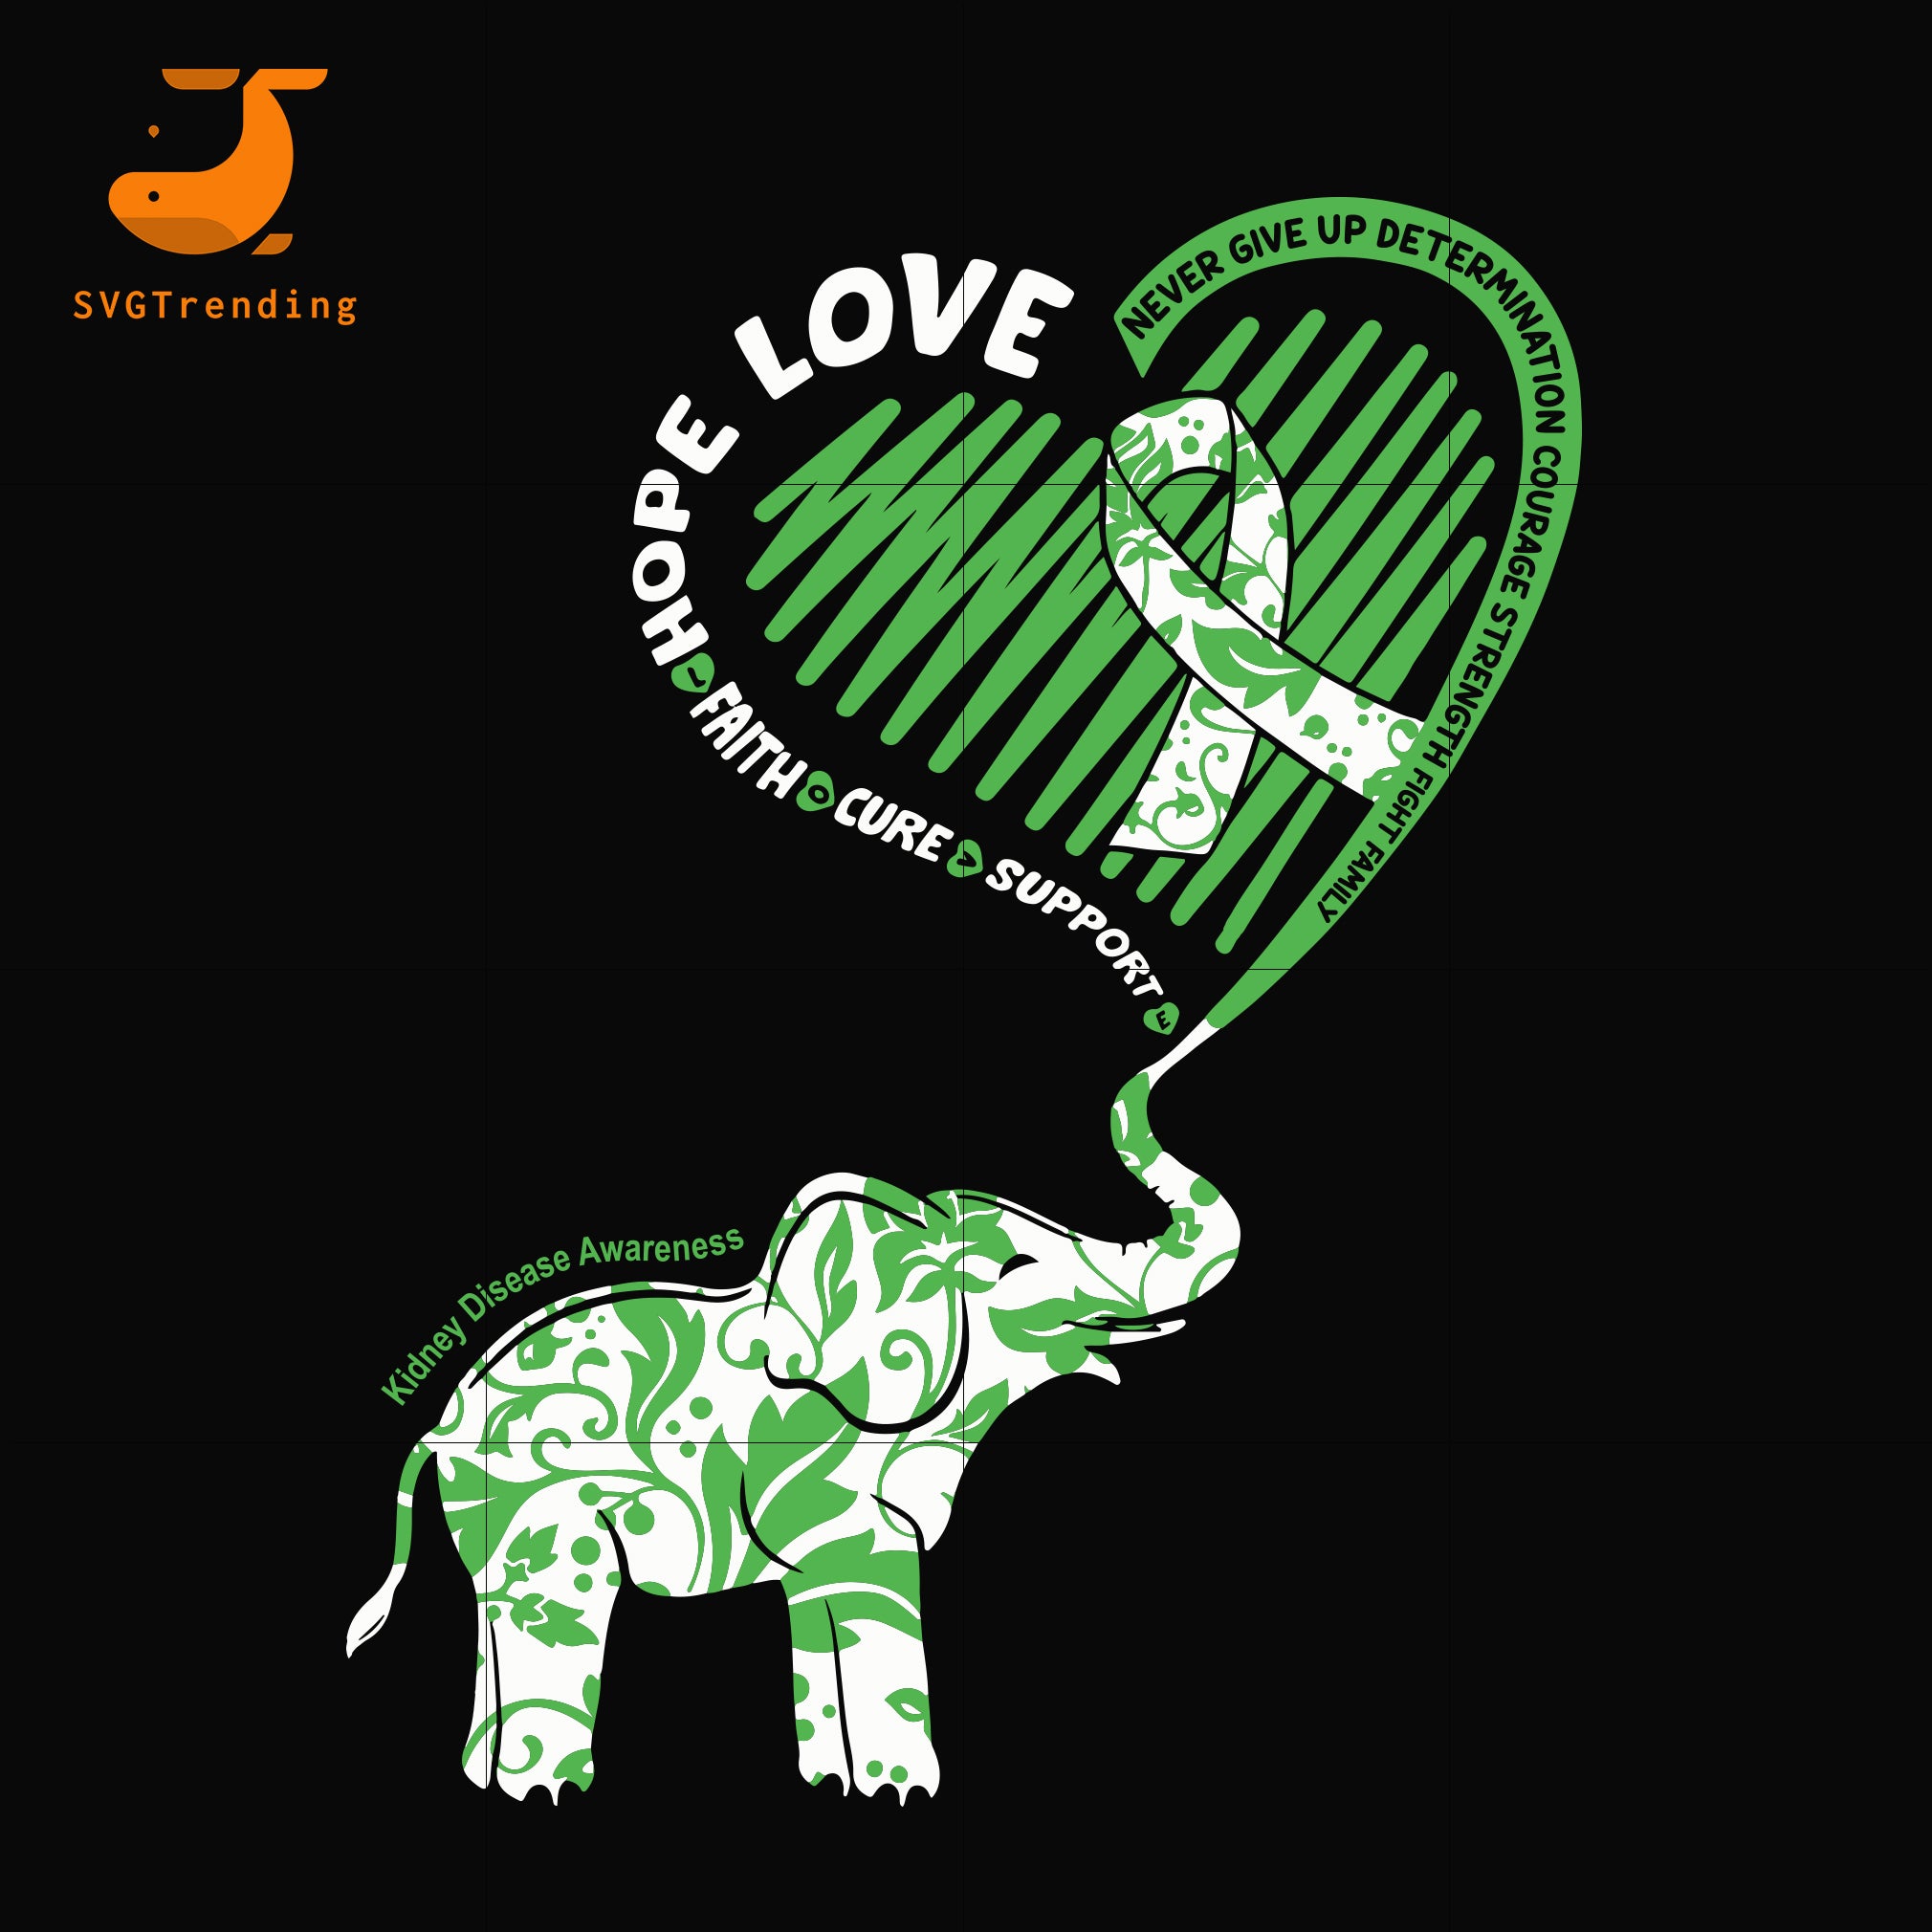 Download Cute Elephant With Heart Kidney Disease Awareness Svg Png Dxf Eps D Svgtrending